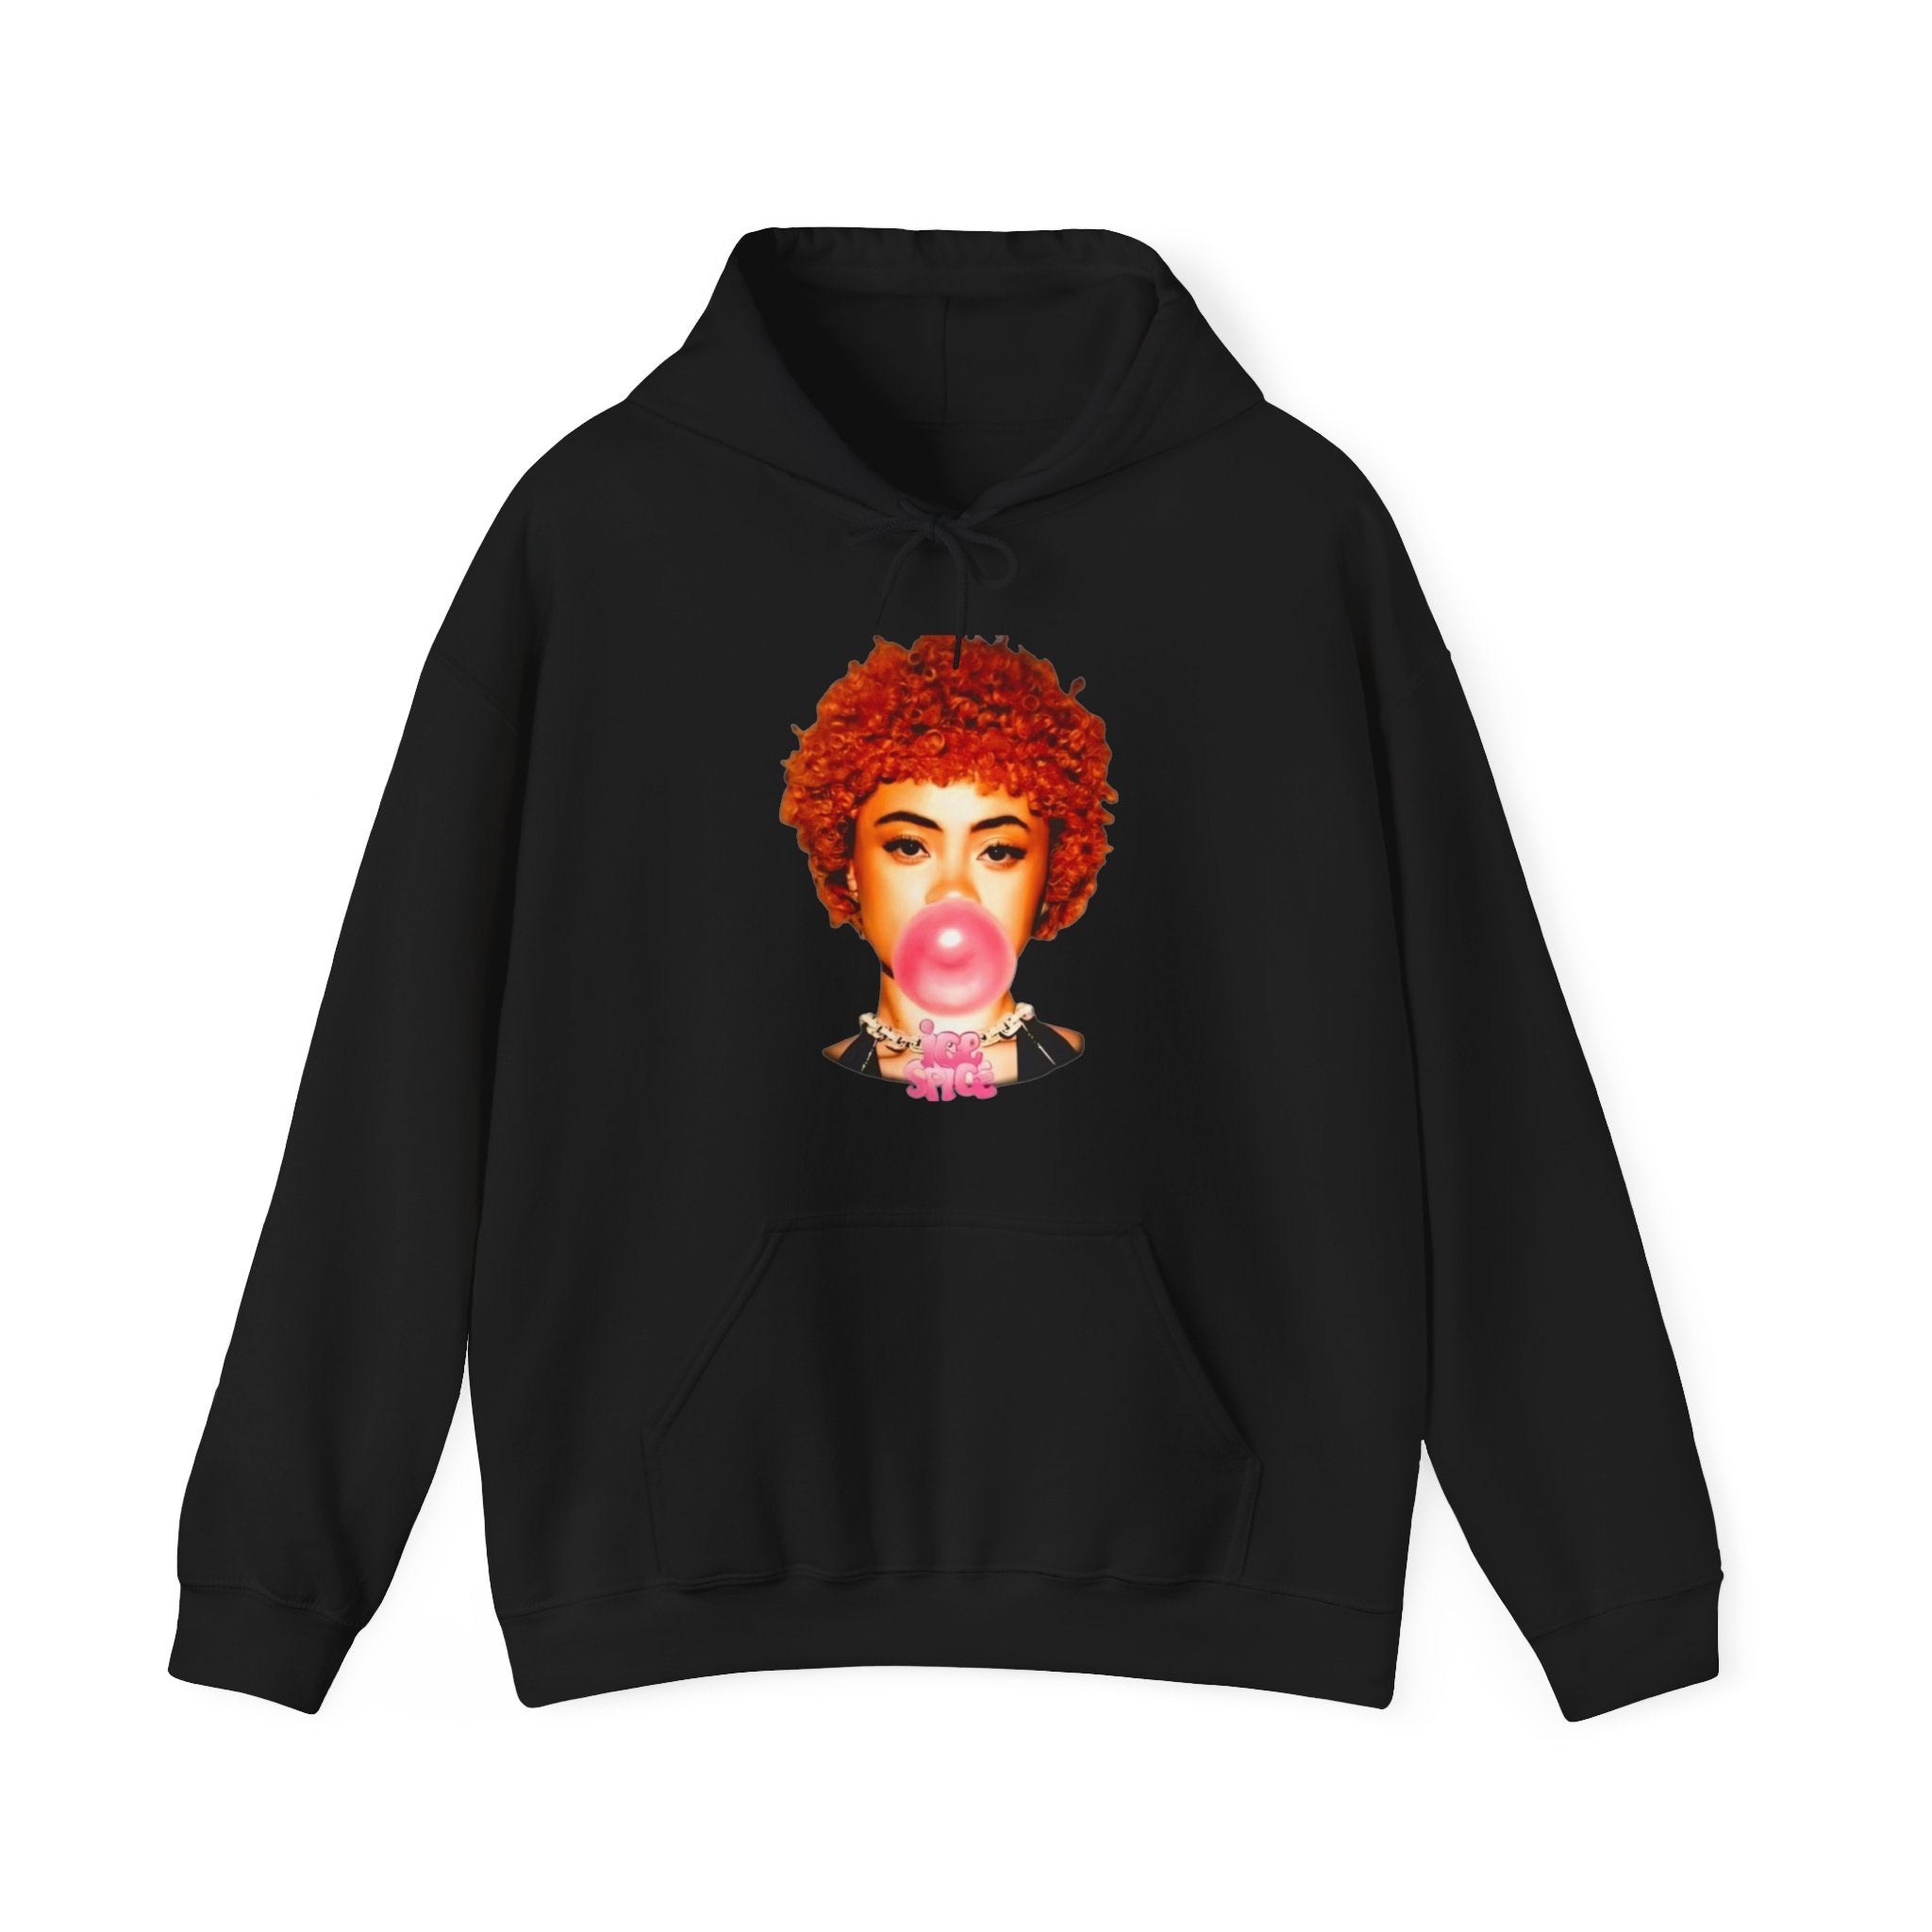 Ice Spice "Bumble Gum" Hoodie